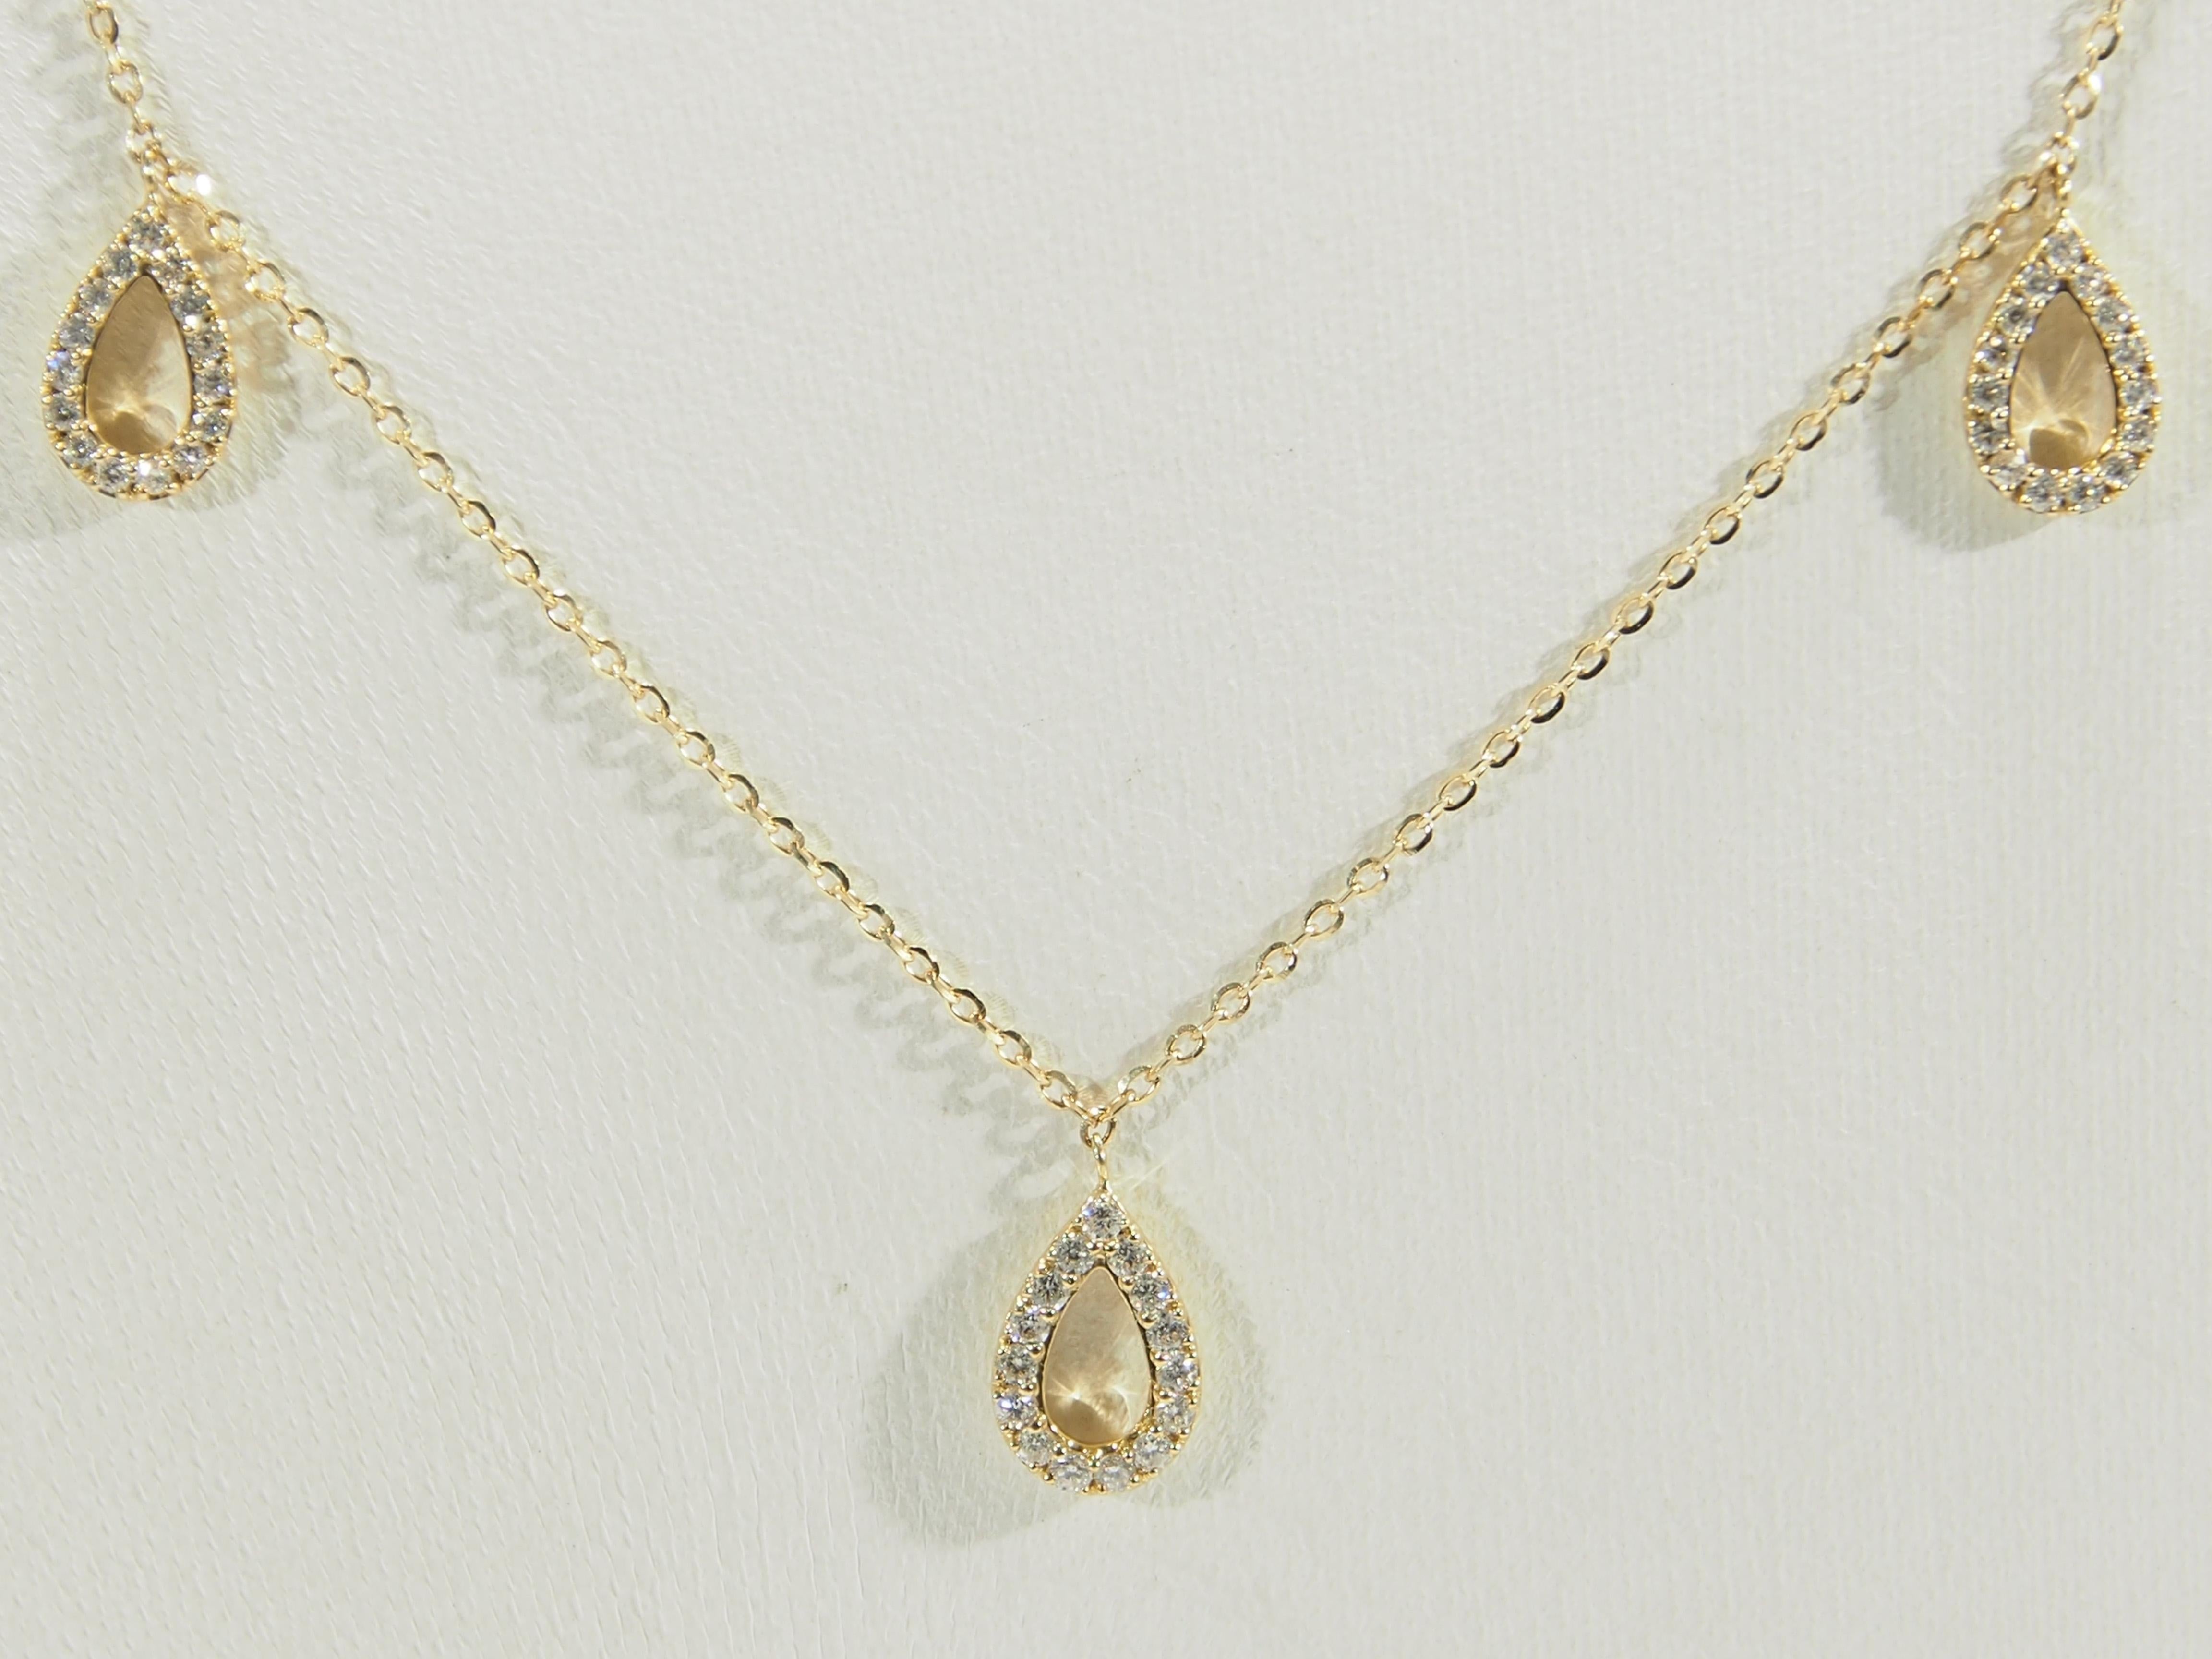 A delicate 18K Yellow Gold Necklace with (75) Round Brilliant Cut Diamonds set in (5) pear shaped stations on a 18